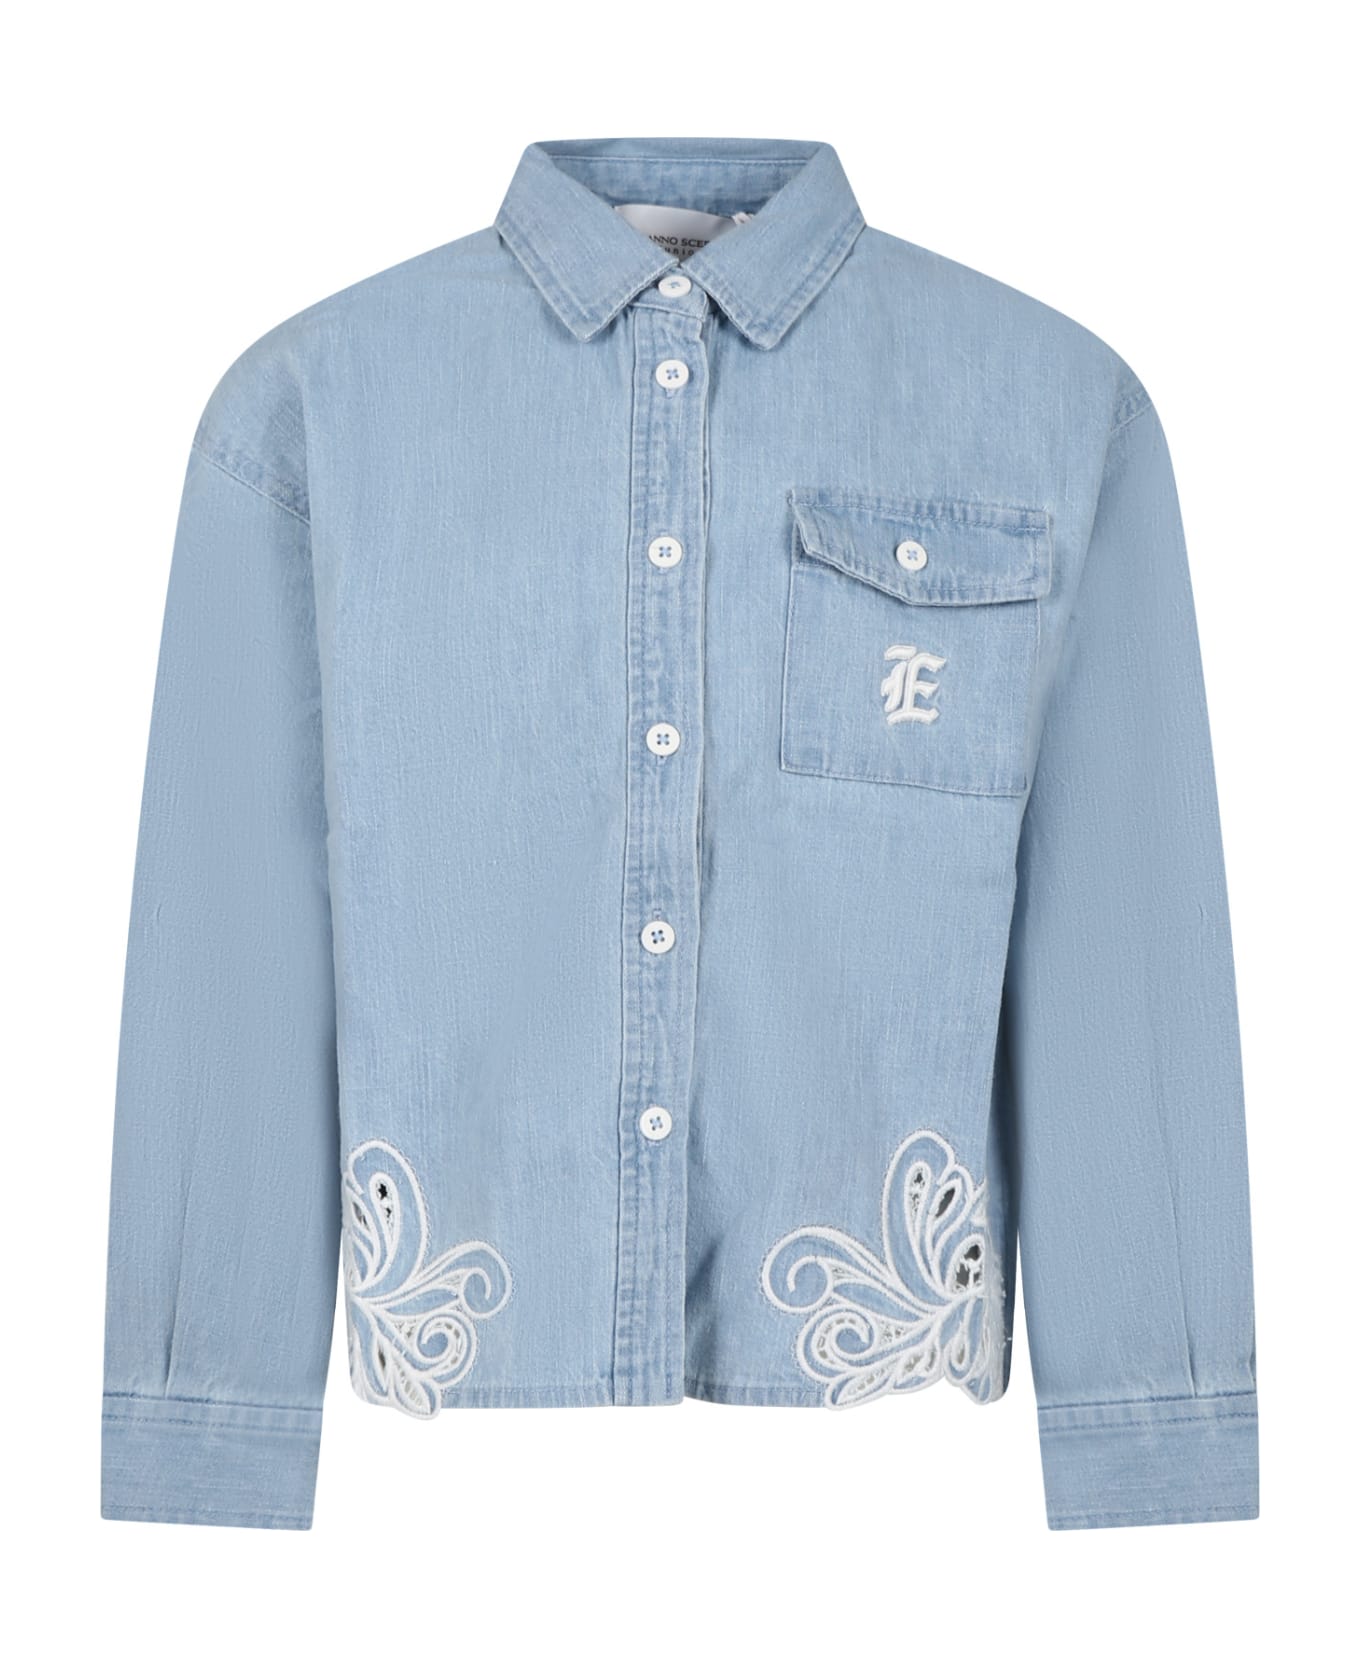 Ermanno Scervino Junior Blue Shirt For Girl With Embroidery And Logo - Denim シャツ